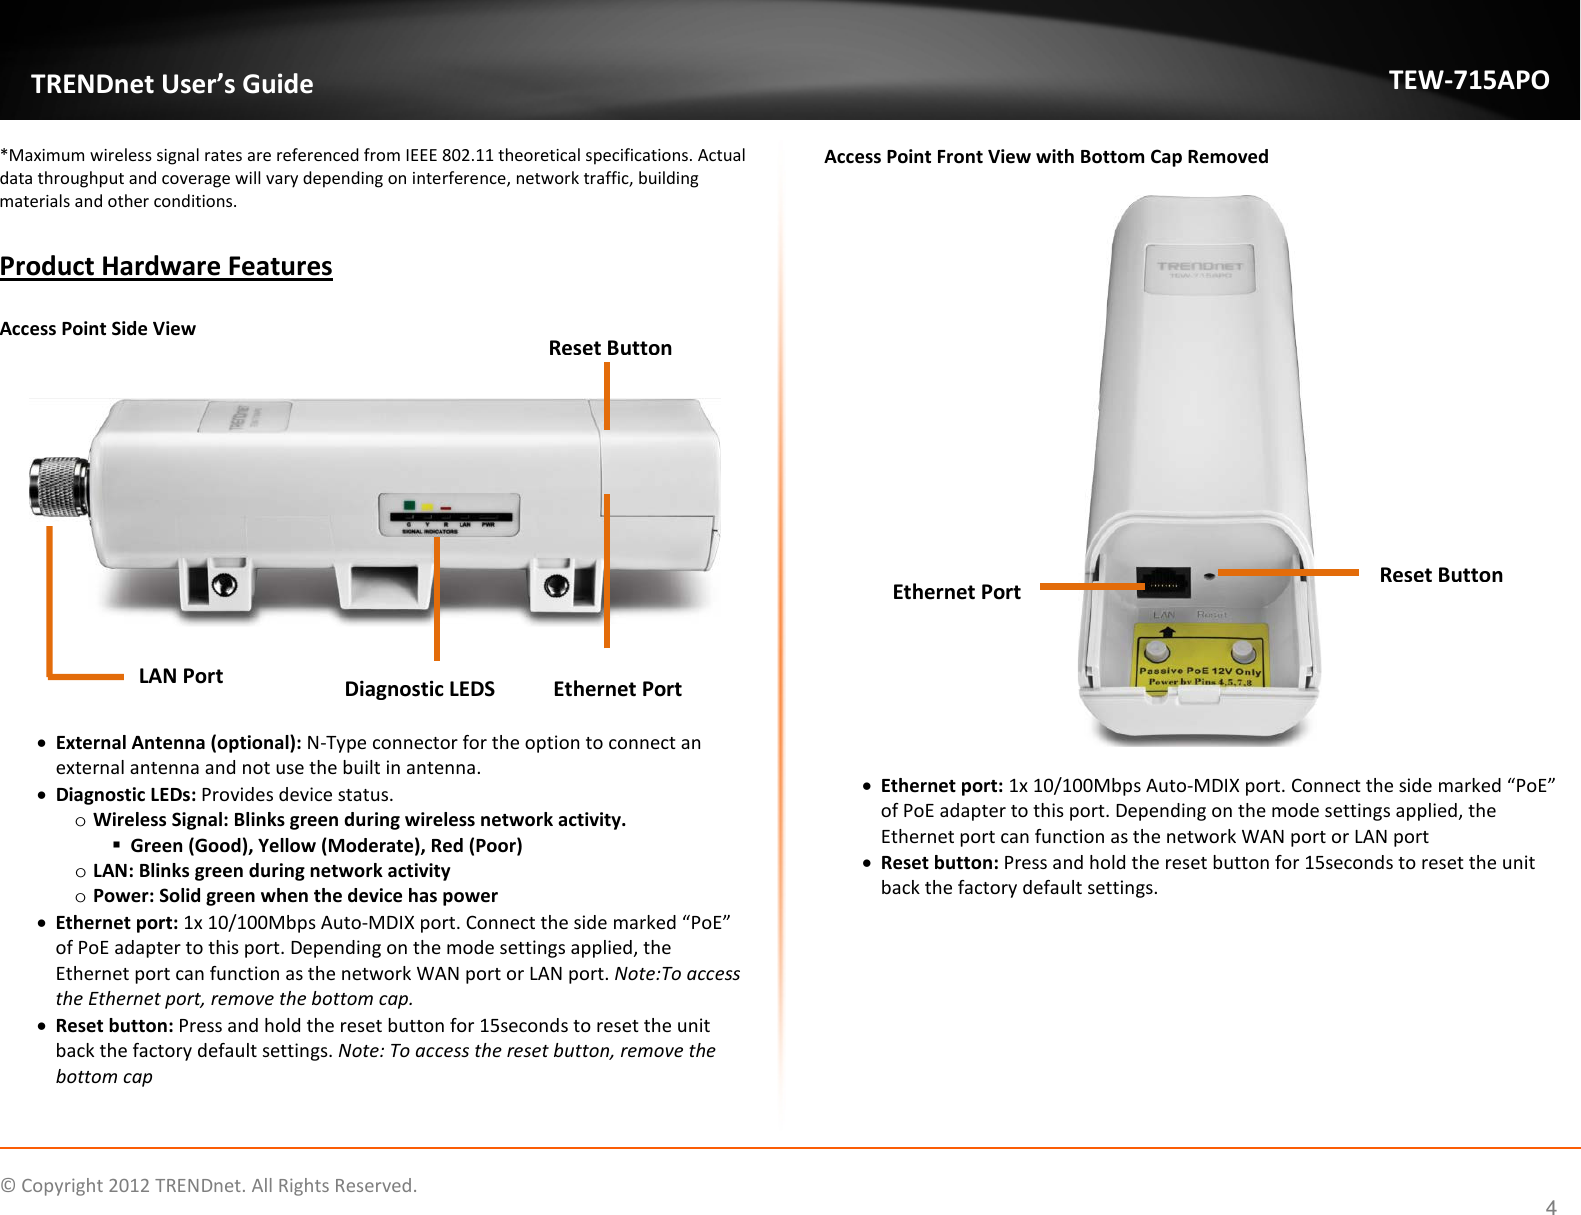                    © Copyright 2012 TRENDnet. All Rights Reserved.      4  TRENDnet User’s Guide TEW-715APO *Maximum wireless signal rates are referenced from IEEE 802.11 theoretical specifications. Actual data throughput and coverage will vary depending on interference, network traffic, building materials and other conditions.  Product Hardware Features  Access Point Side View         • External Antenna (optional): N-Type connector for the option to connect an external antenna and not use the built in antenna.  • Diagnostic LEDs: Provides device status.  o Wireless Signal: Blinks green during wireless network activity.   Green (Good), Yellow (Moderate), Red (Poor) o LAN: Blinks green during network activity o Power: Solid green when the device has power • Ethernet port: 1x 10/100Mbps Auto-MDIX port. Connect the side marked “PoE” of PoE adapter to this port. Depending on the mode settings applied, the Ethernet port can function as the network WAN port or LAN port. Note:To access the Ethernet port, remove the bottom cap.  • Reset button: Press and hold the reset button for 15seconds to reset the unit back the factory default settings. Note: To access the reset button, remove the bottom cap   Access Point Front View with Bottom Cap Removed    • Ethernet port: 1x 10/100Mbps Auto-MDIX port. Connect the side marked “PoE” of PoE adapter to this port. Depending on the mode settings applied, the Ethernet port can function as the network WAN port or LAN port • Reset button: Press and hold the reset button for 15seconds to reset the unit back the factory default settings.              LAN Port    Diagnostic LEDS Reset Button   Ethernet Port   Ethernet Port Reset Button 